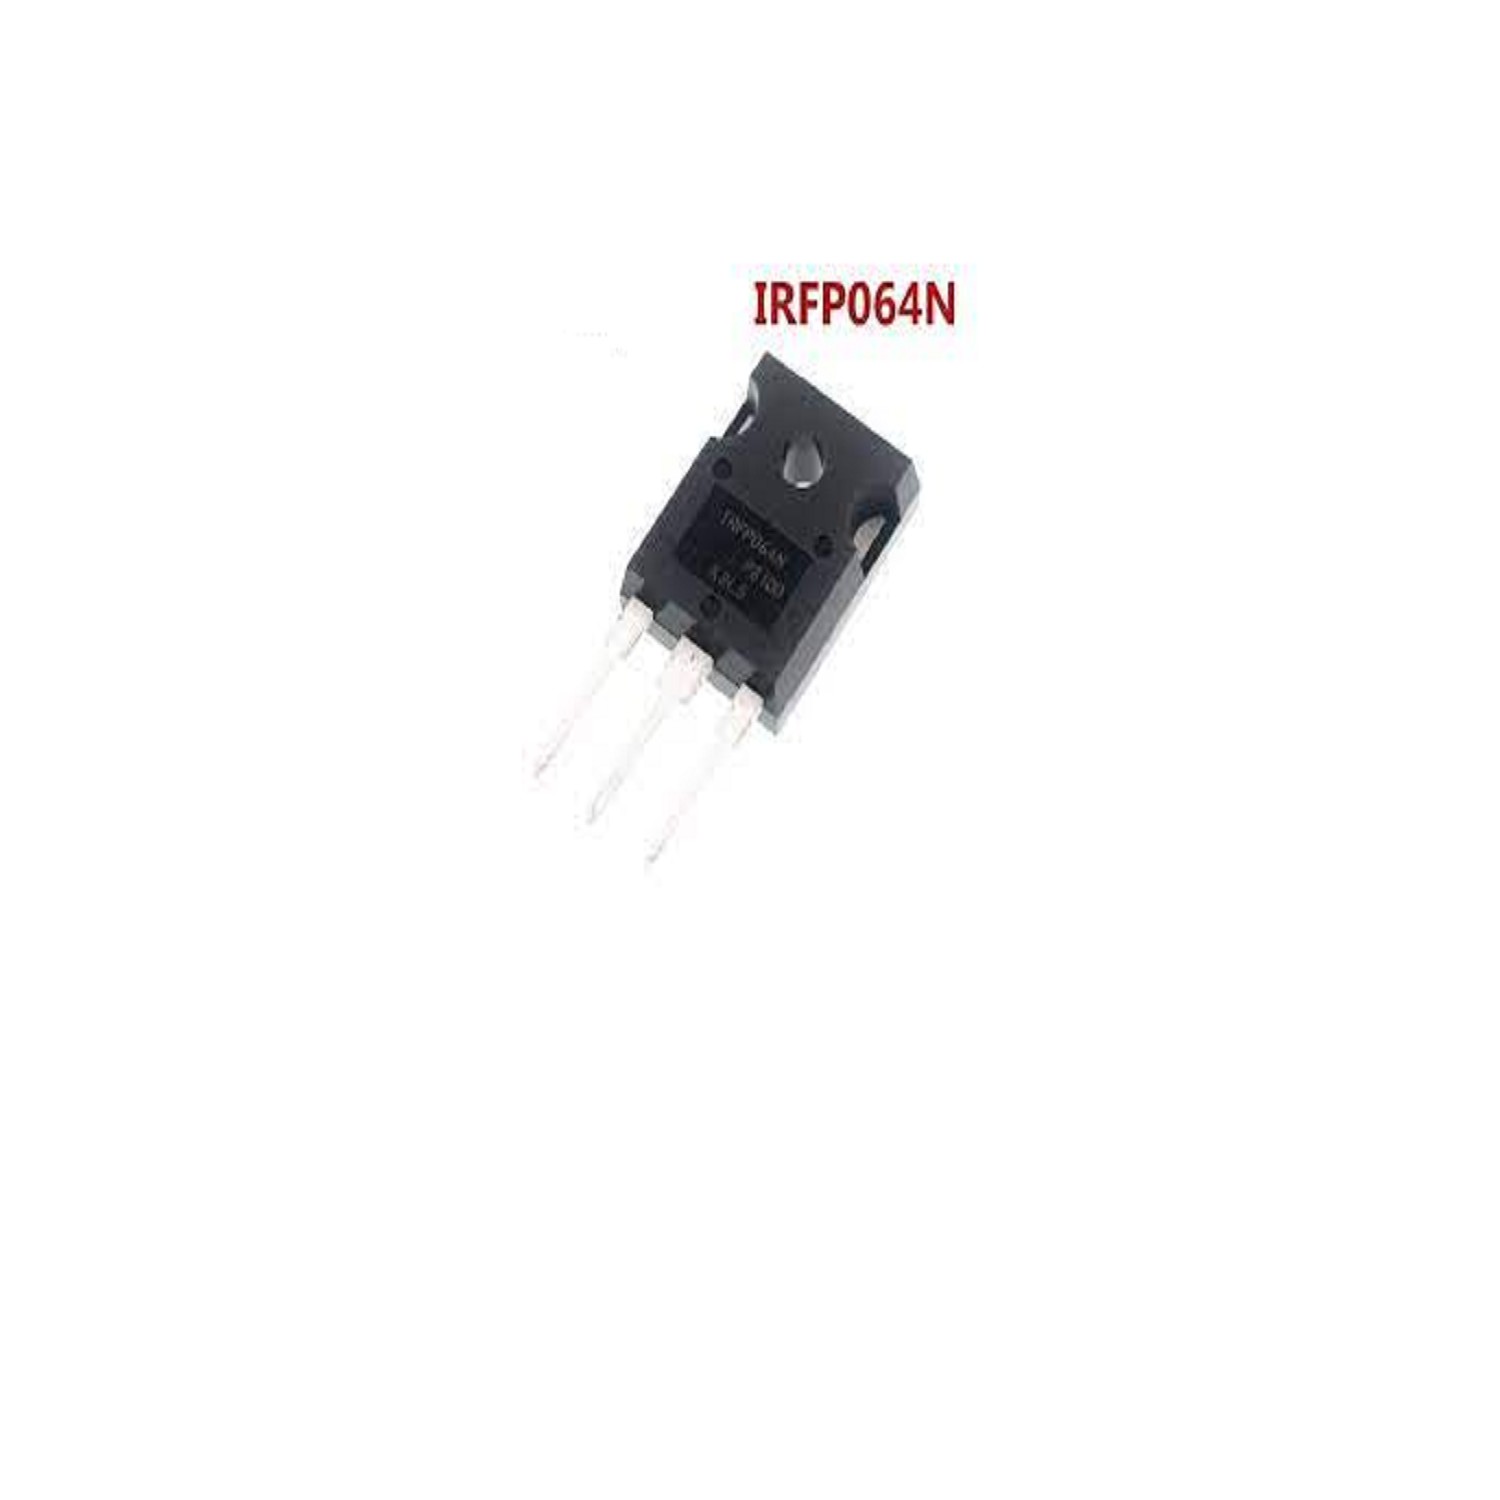 TRANSISTOR FET IRFP 064NP Power MOSFET(Vdss=55V, Rds(on)=0.0 08ohm, Id=110A?)